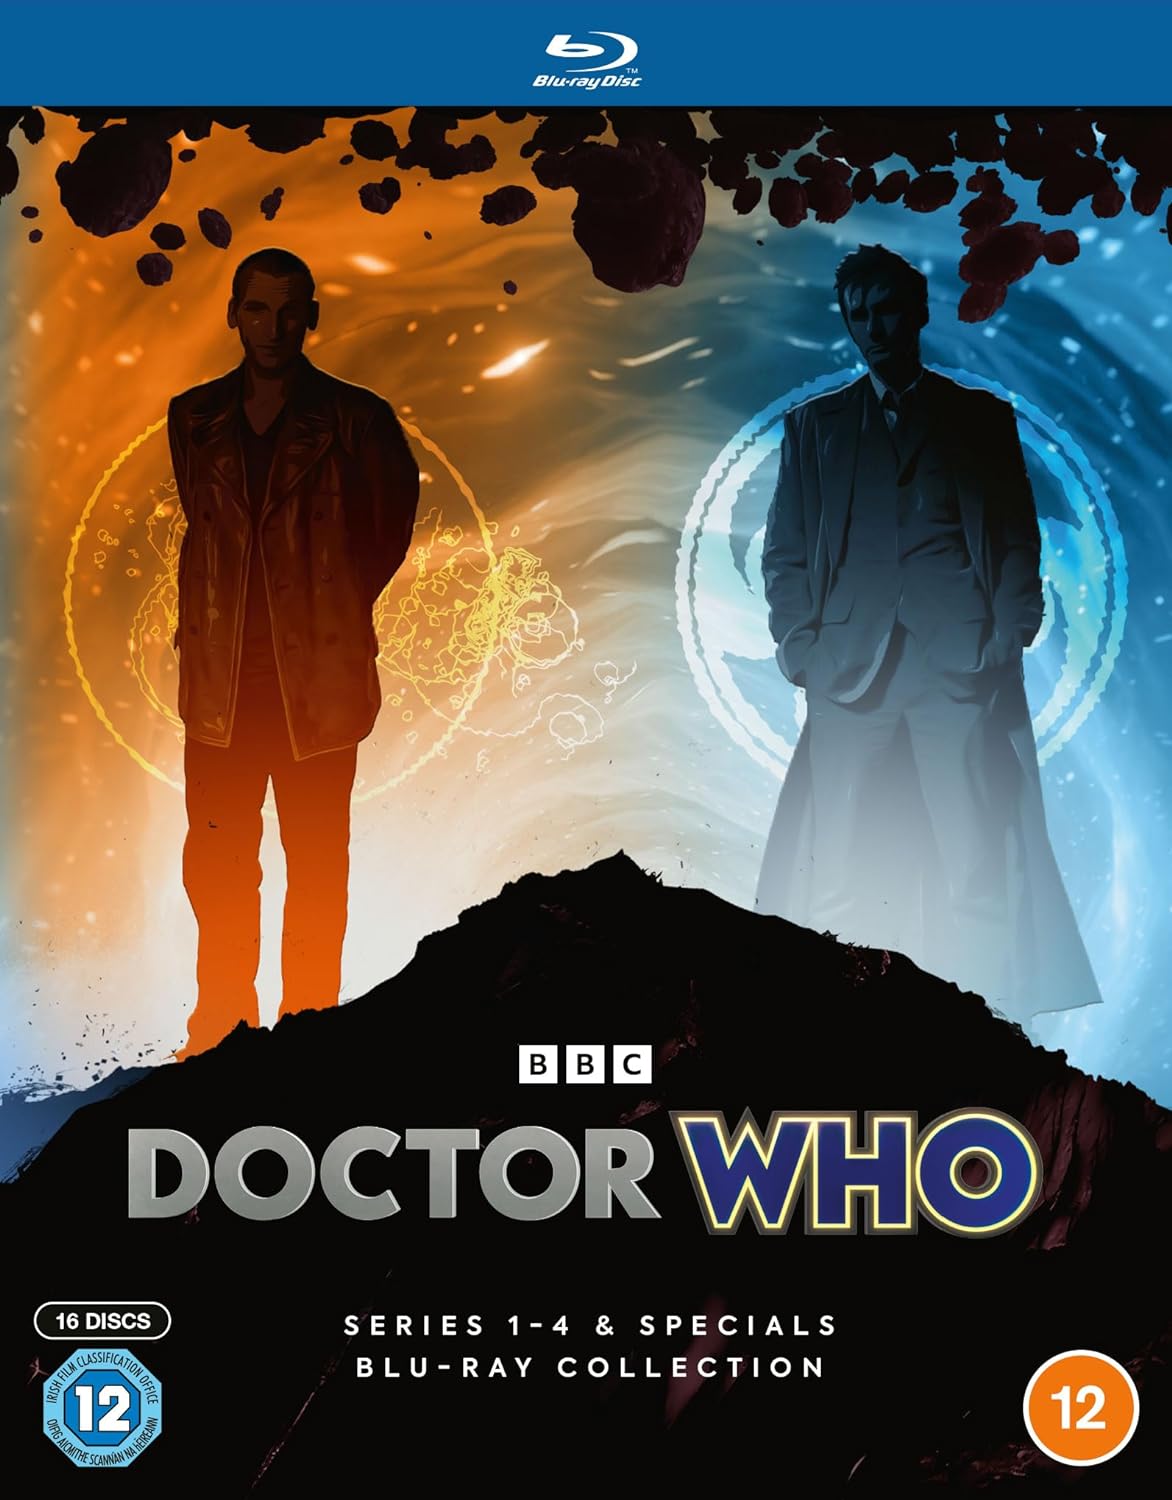 Series 1-4 & Specials Blu-ray Collection